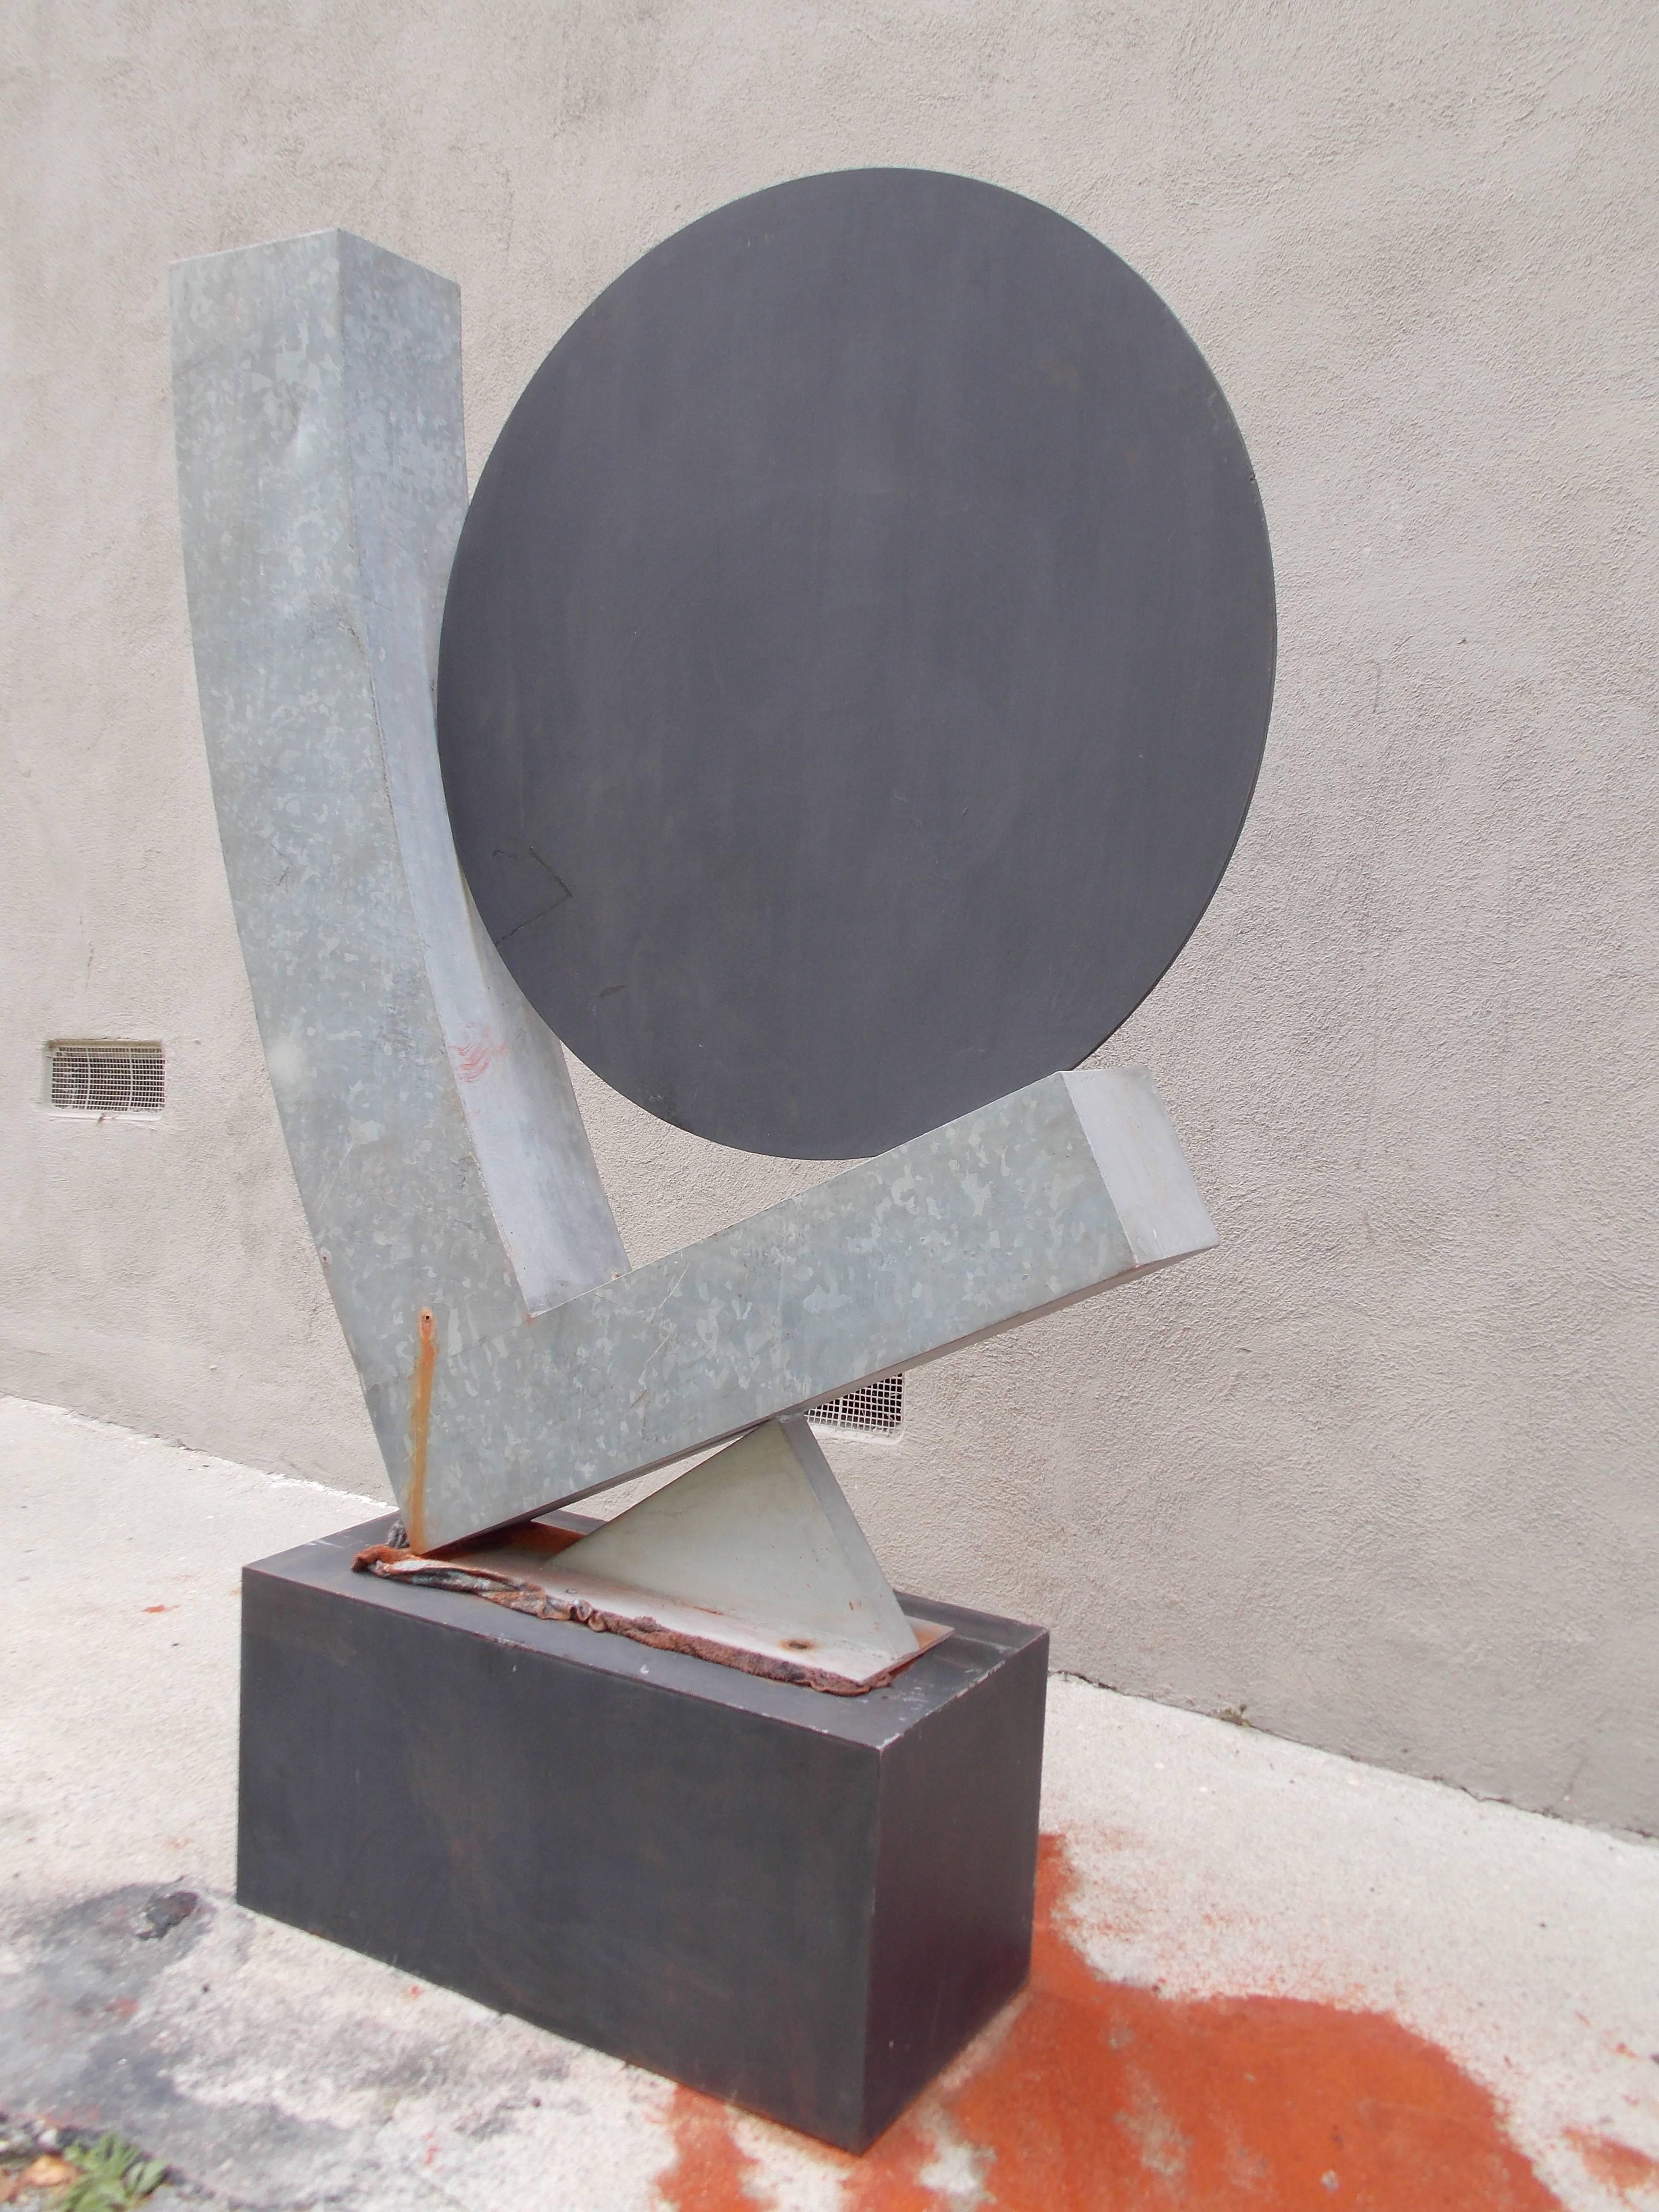 1946-
A custom piece from an estate in Beverly Hills.
It was displayed by the pool.
Both pieces are not attached. 
It had a solid concrete rectangle piece that sat between both pieces (on top of the bottom piece) roughly about two 3' high.